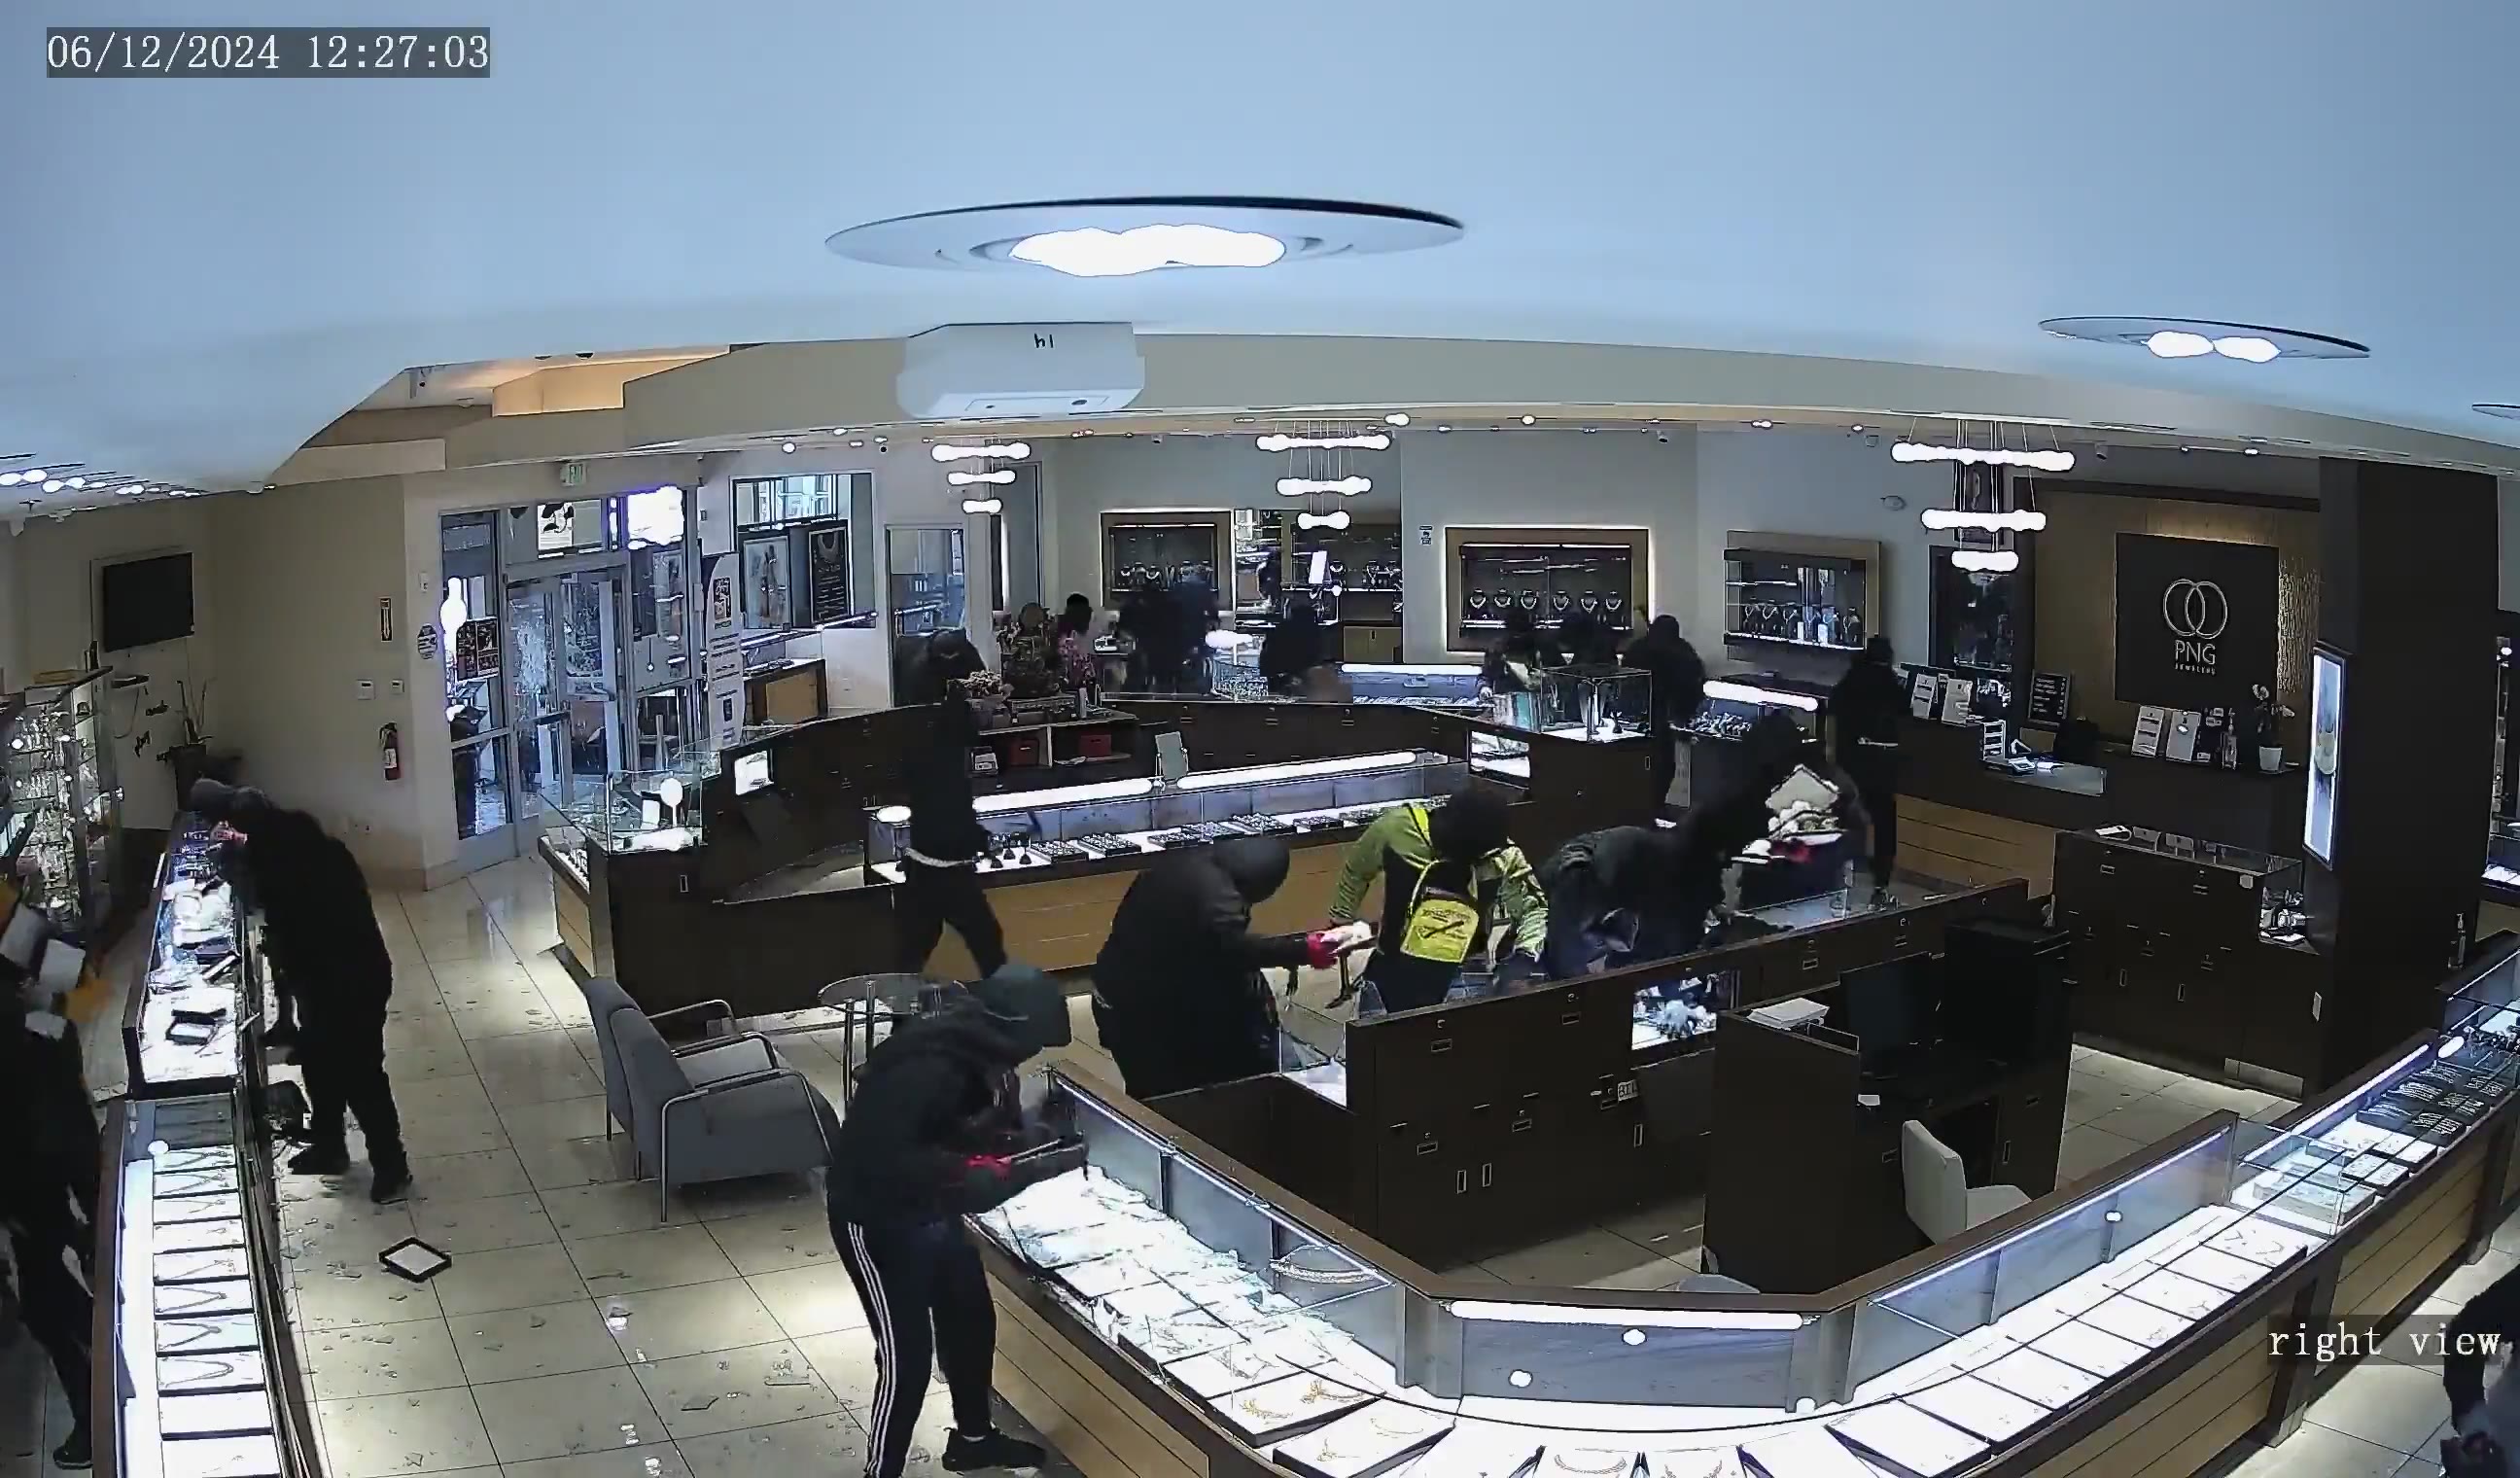 Raw: Smash & grab robbery at Bay Area jewelry store